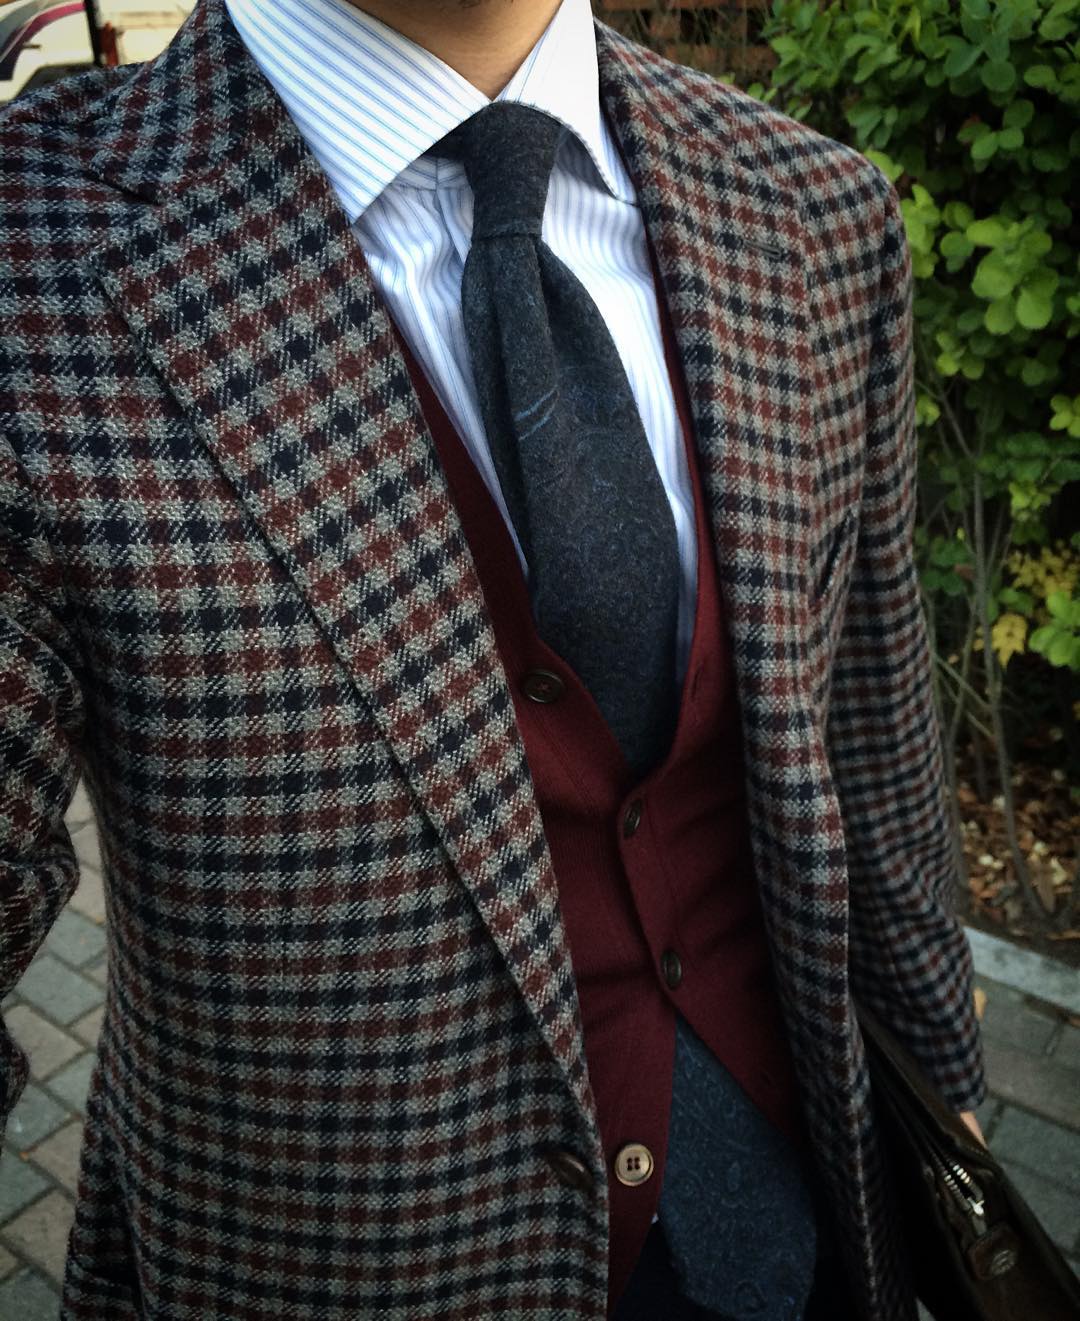 Excellent combination between this Cesare Attolini cashmere checked jacket, the woolen Memento Mori tie, the Barba Napoli preppy stripped shit and the red Zanone knit. By @kyong_jj